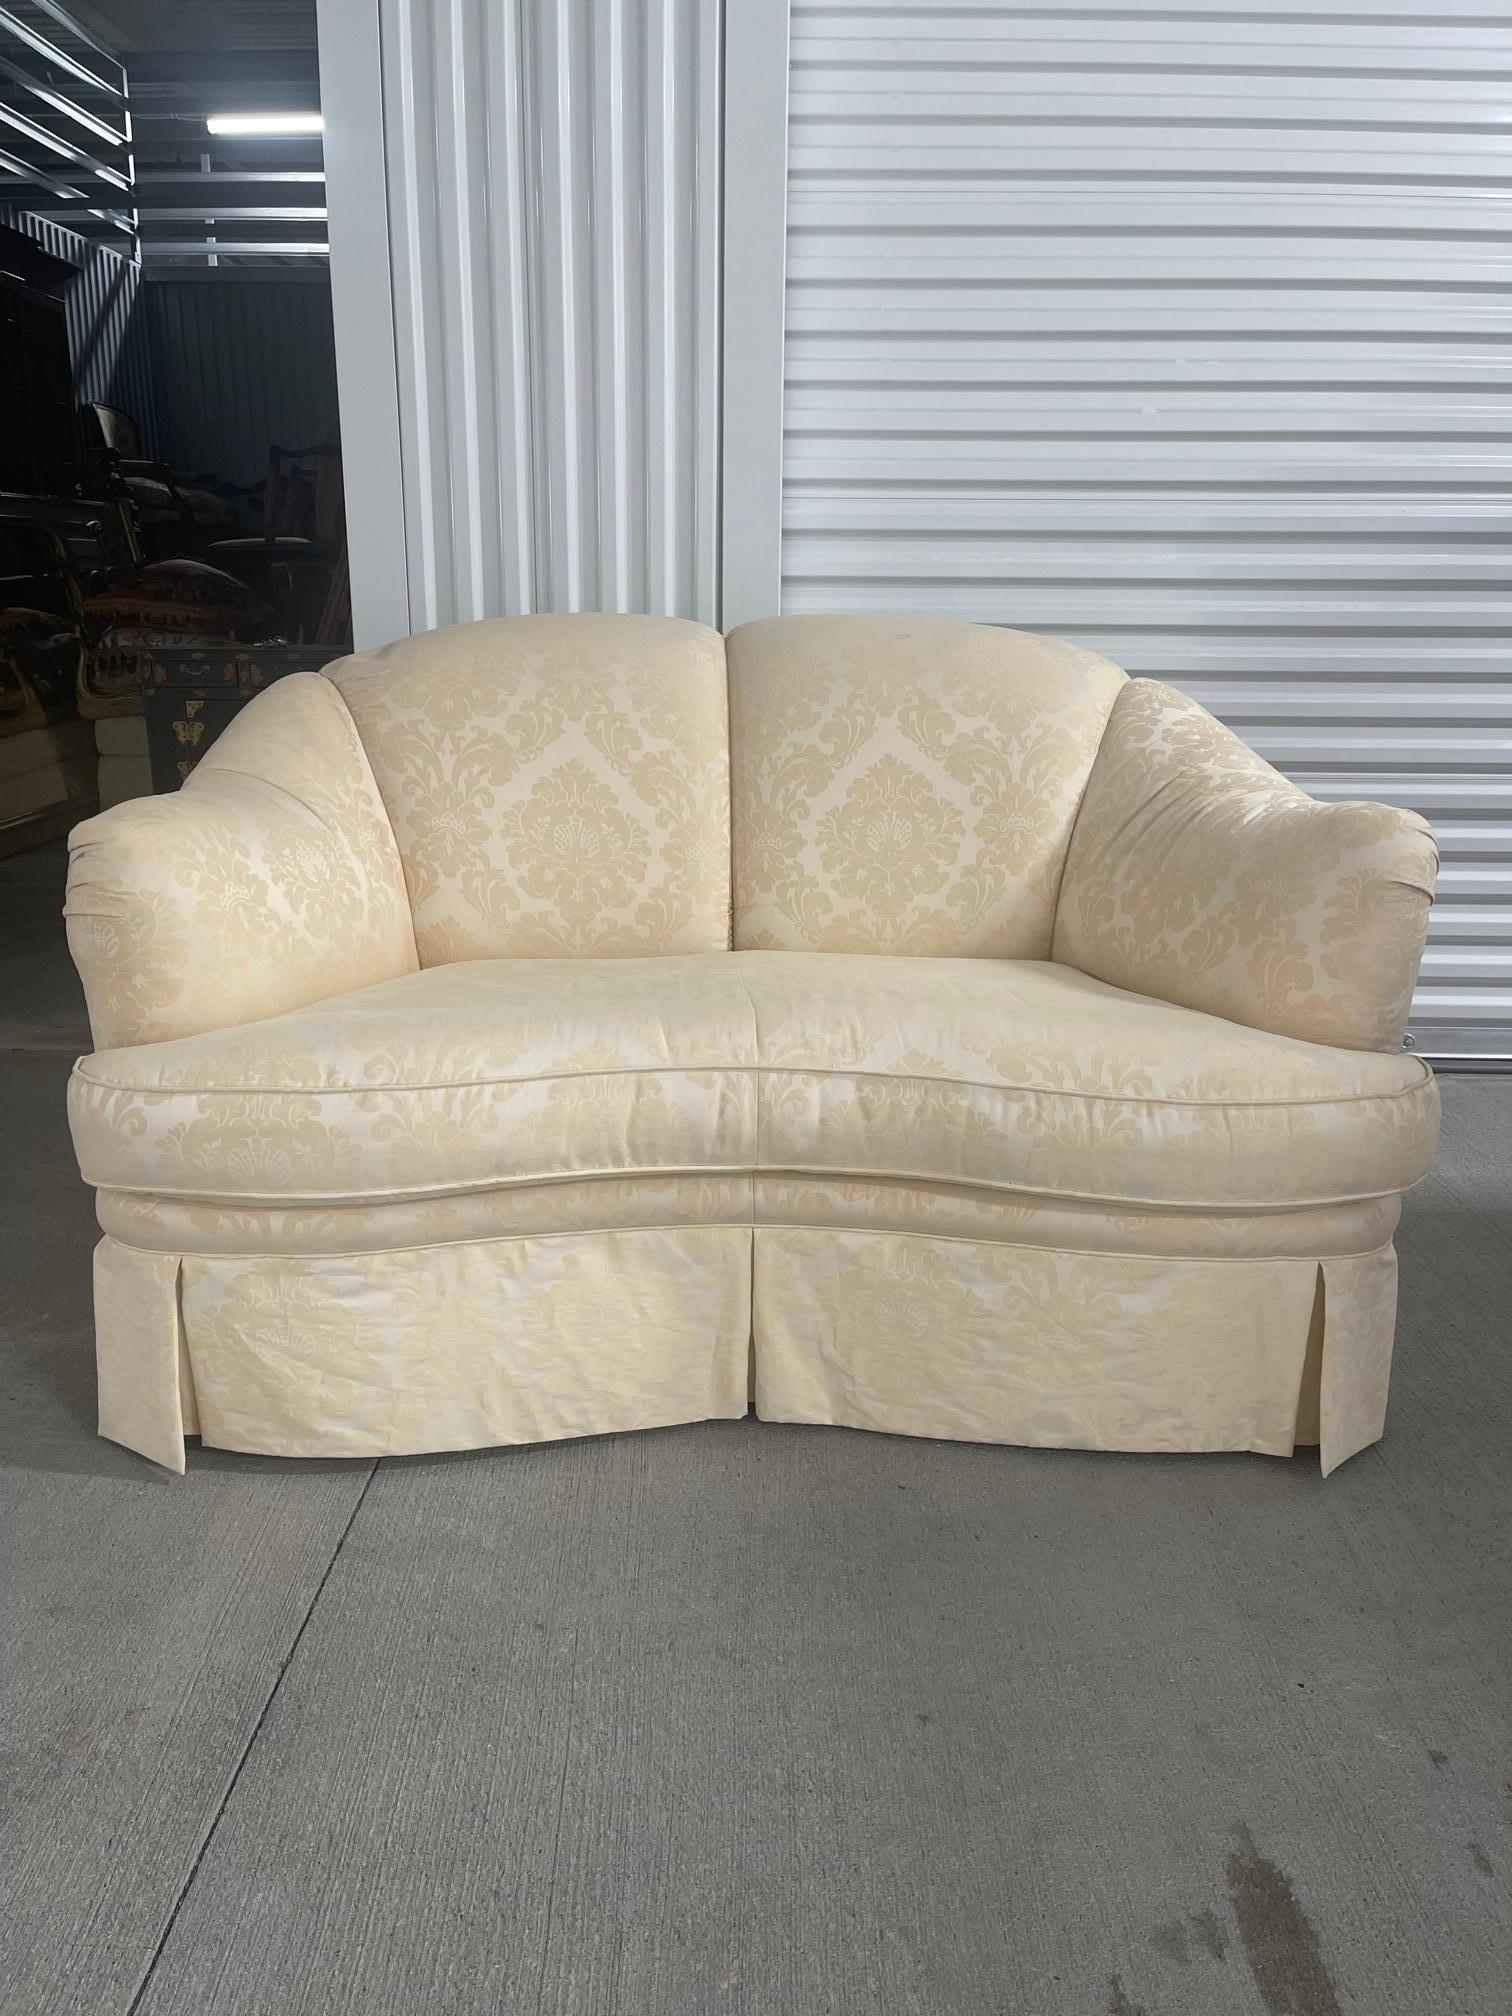 20th Century English Scalloped Style Loveseat with a Serpentine Front and Upholstered in Off White Damask.